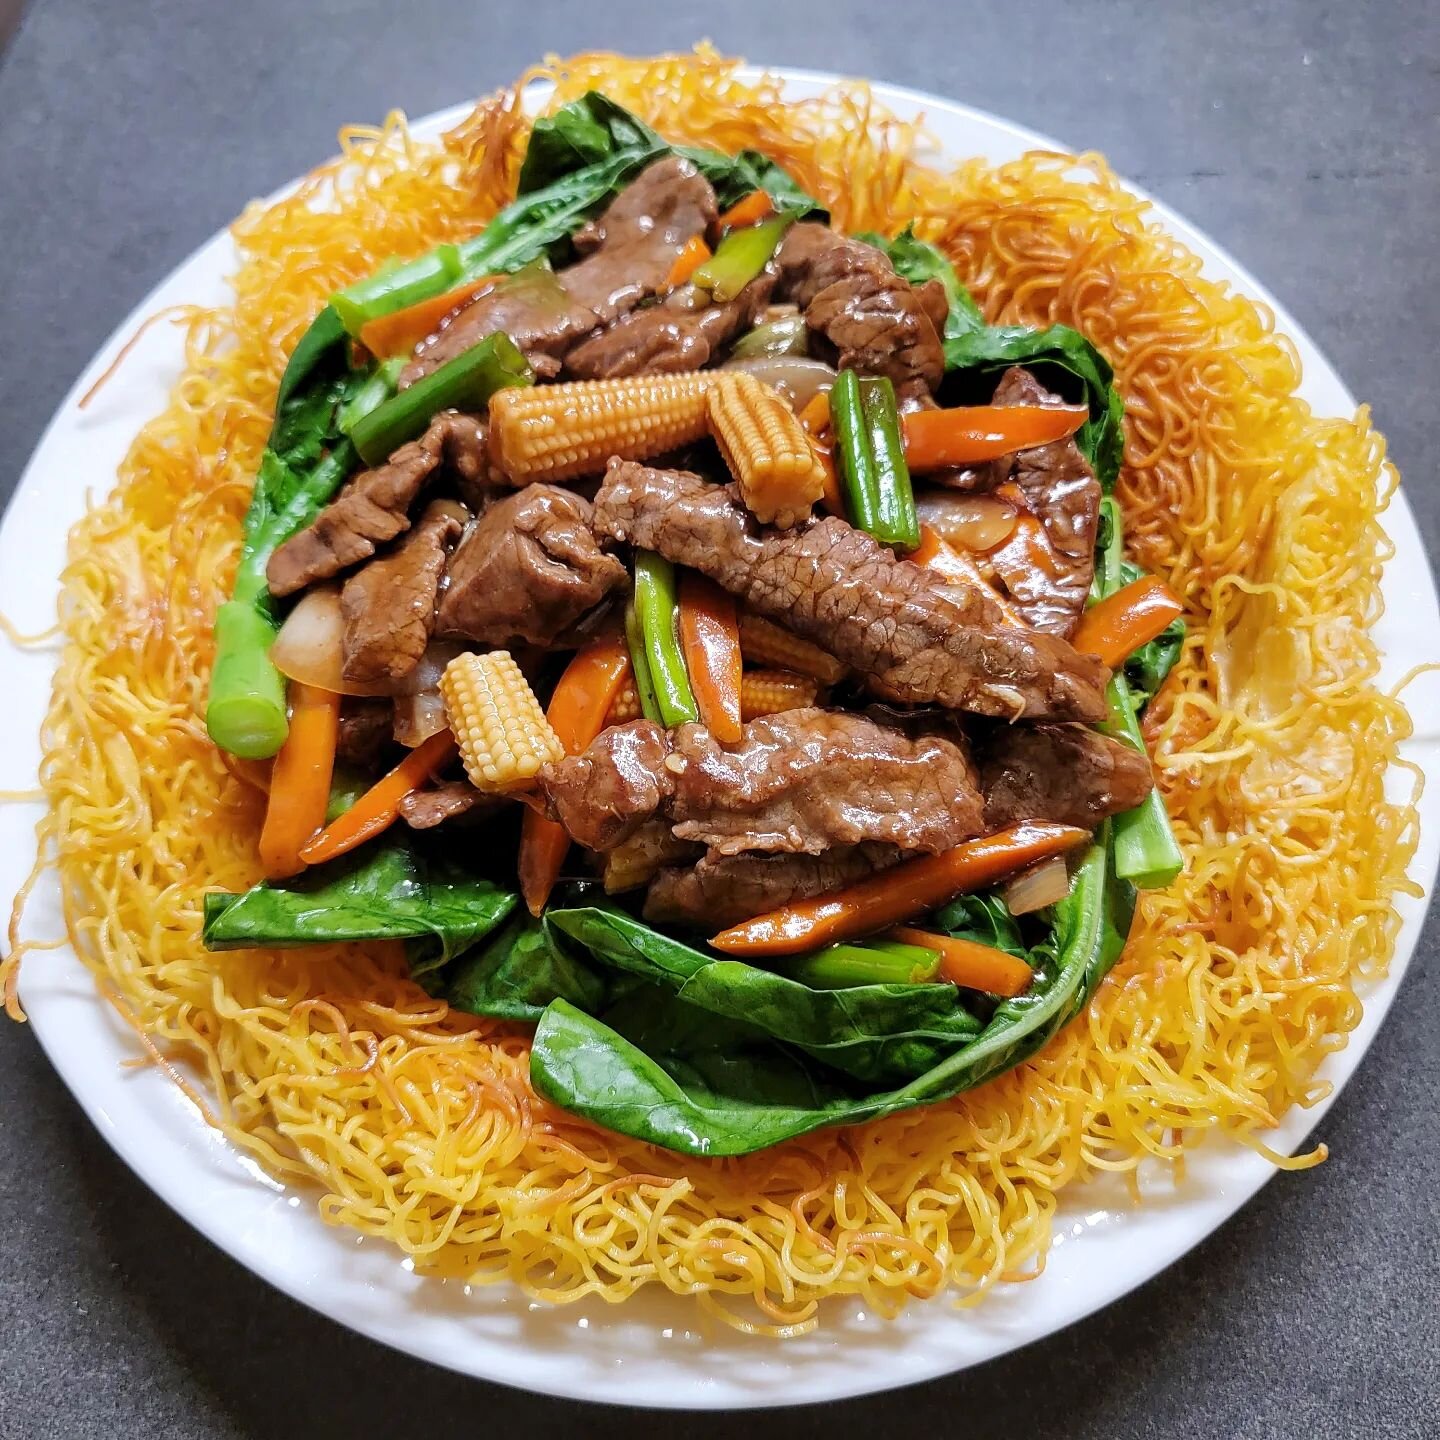 Growing up, beef pan fried noodles was my favorite food. My parents would give me the crispy fried parts and they'd eat the soggy sauced parts. Now I have someone that can cook it from scratch AND eat the soggy parts! @tiffixd